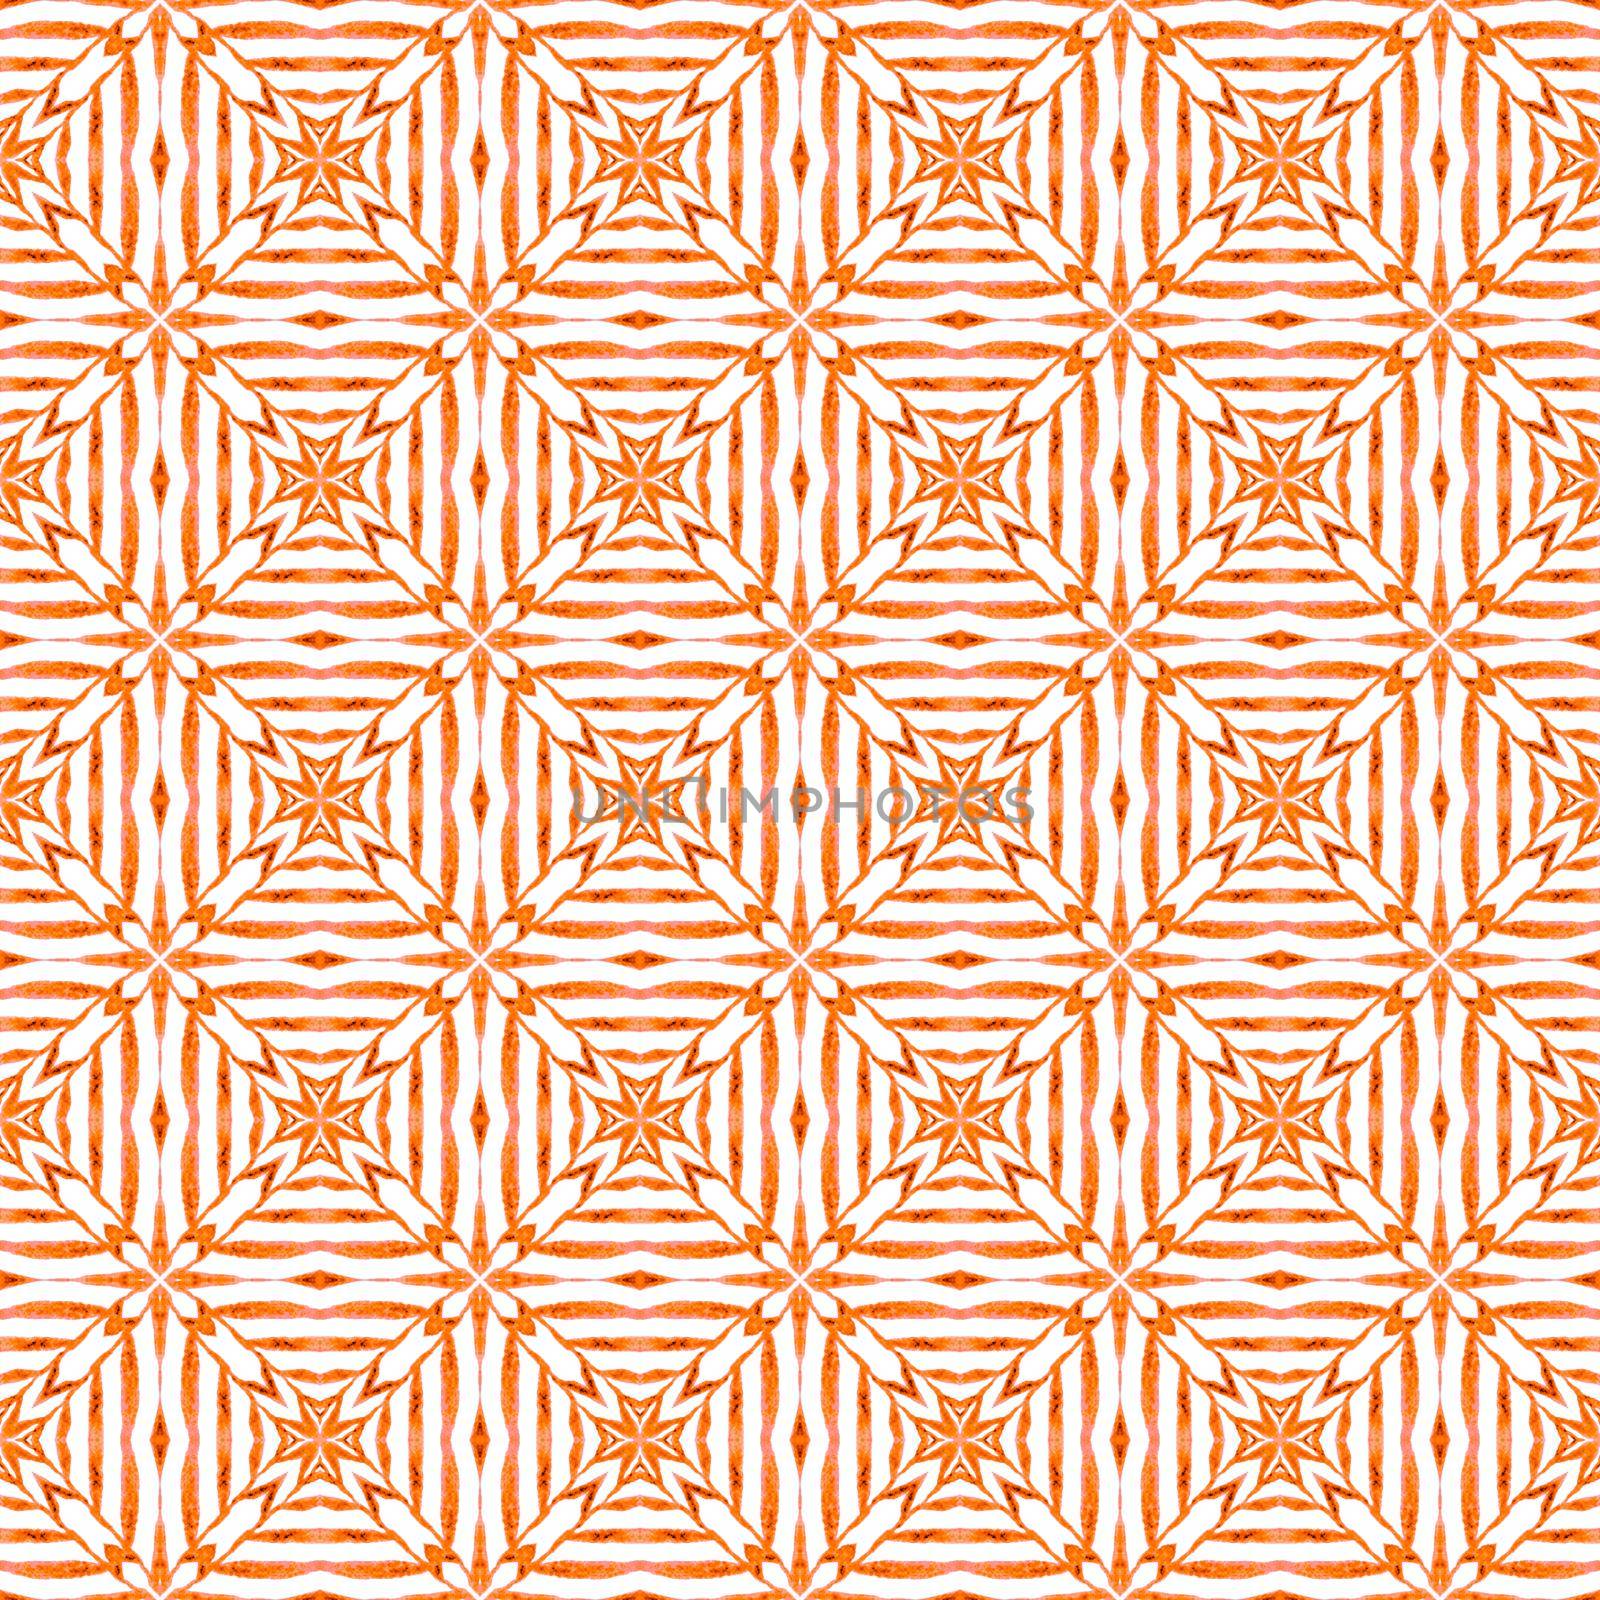 Repeating striped hand drawn border. Orange unusual boho chic summer design. Striped hand drawn design. Textile ready awesome print, swimwear fabric, wallpaper, wrapping.